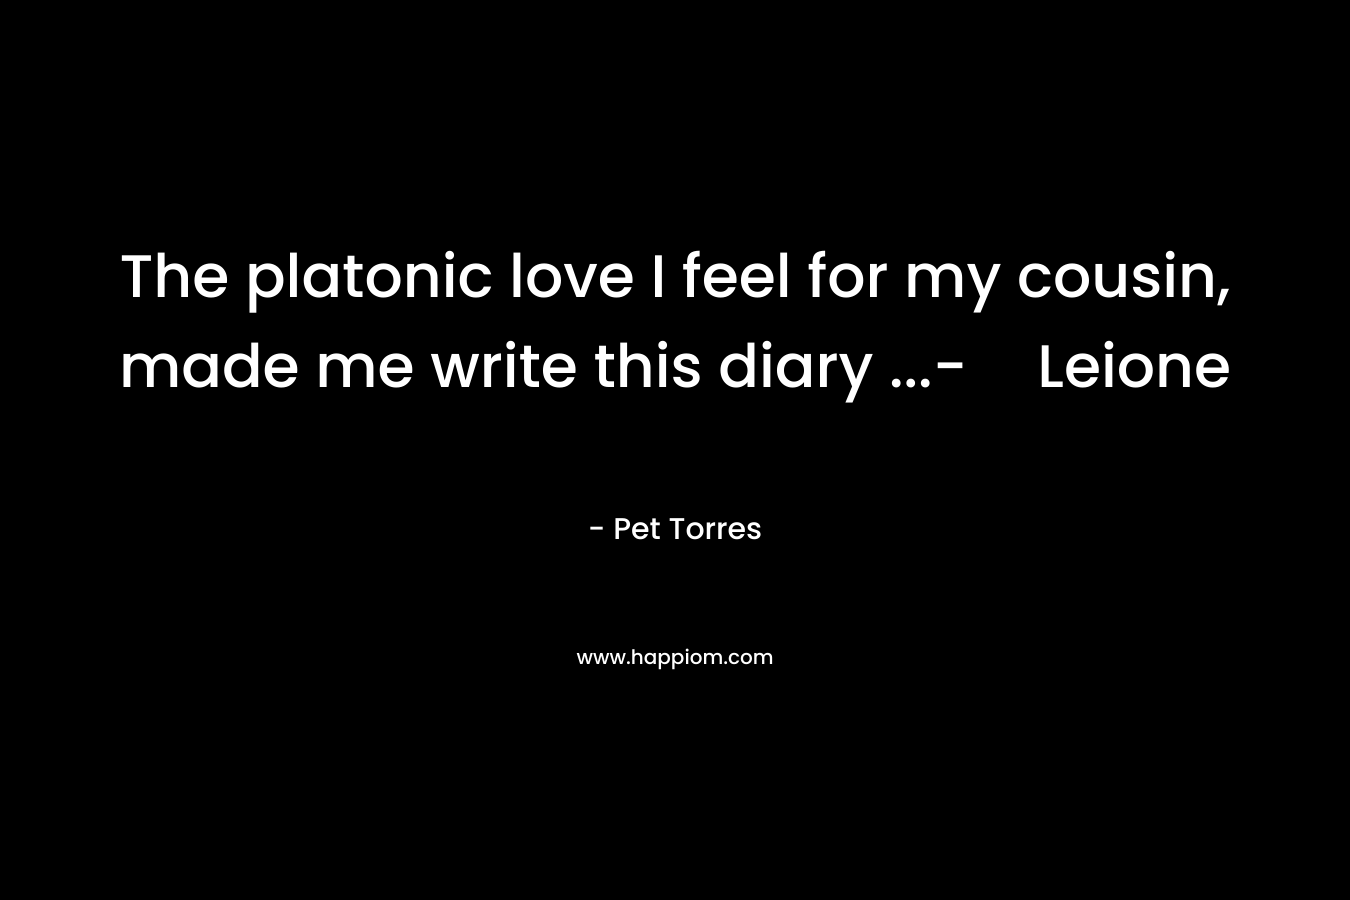 The platonic love I feel for my cousin, made me write this diary ...-Leione